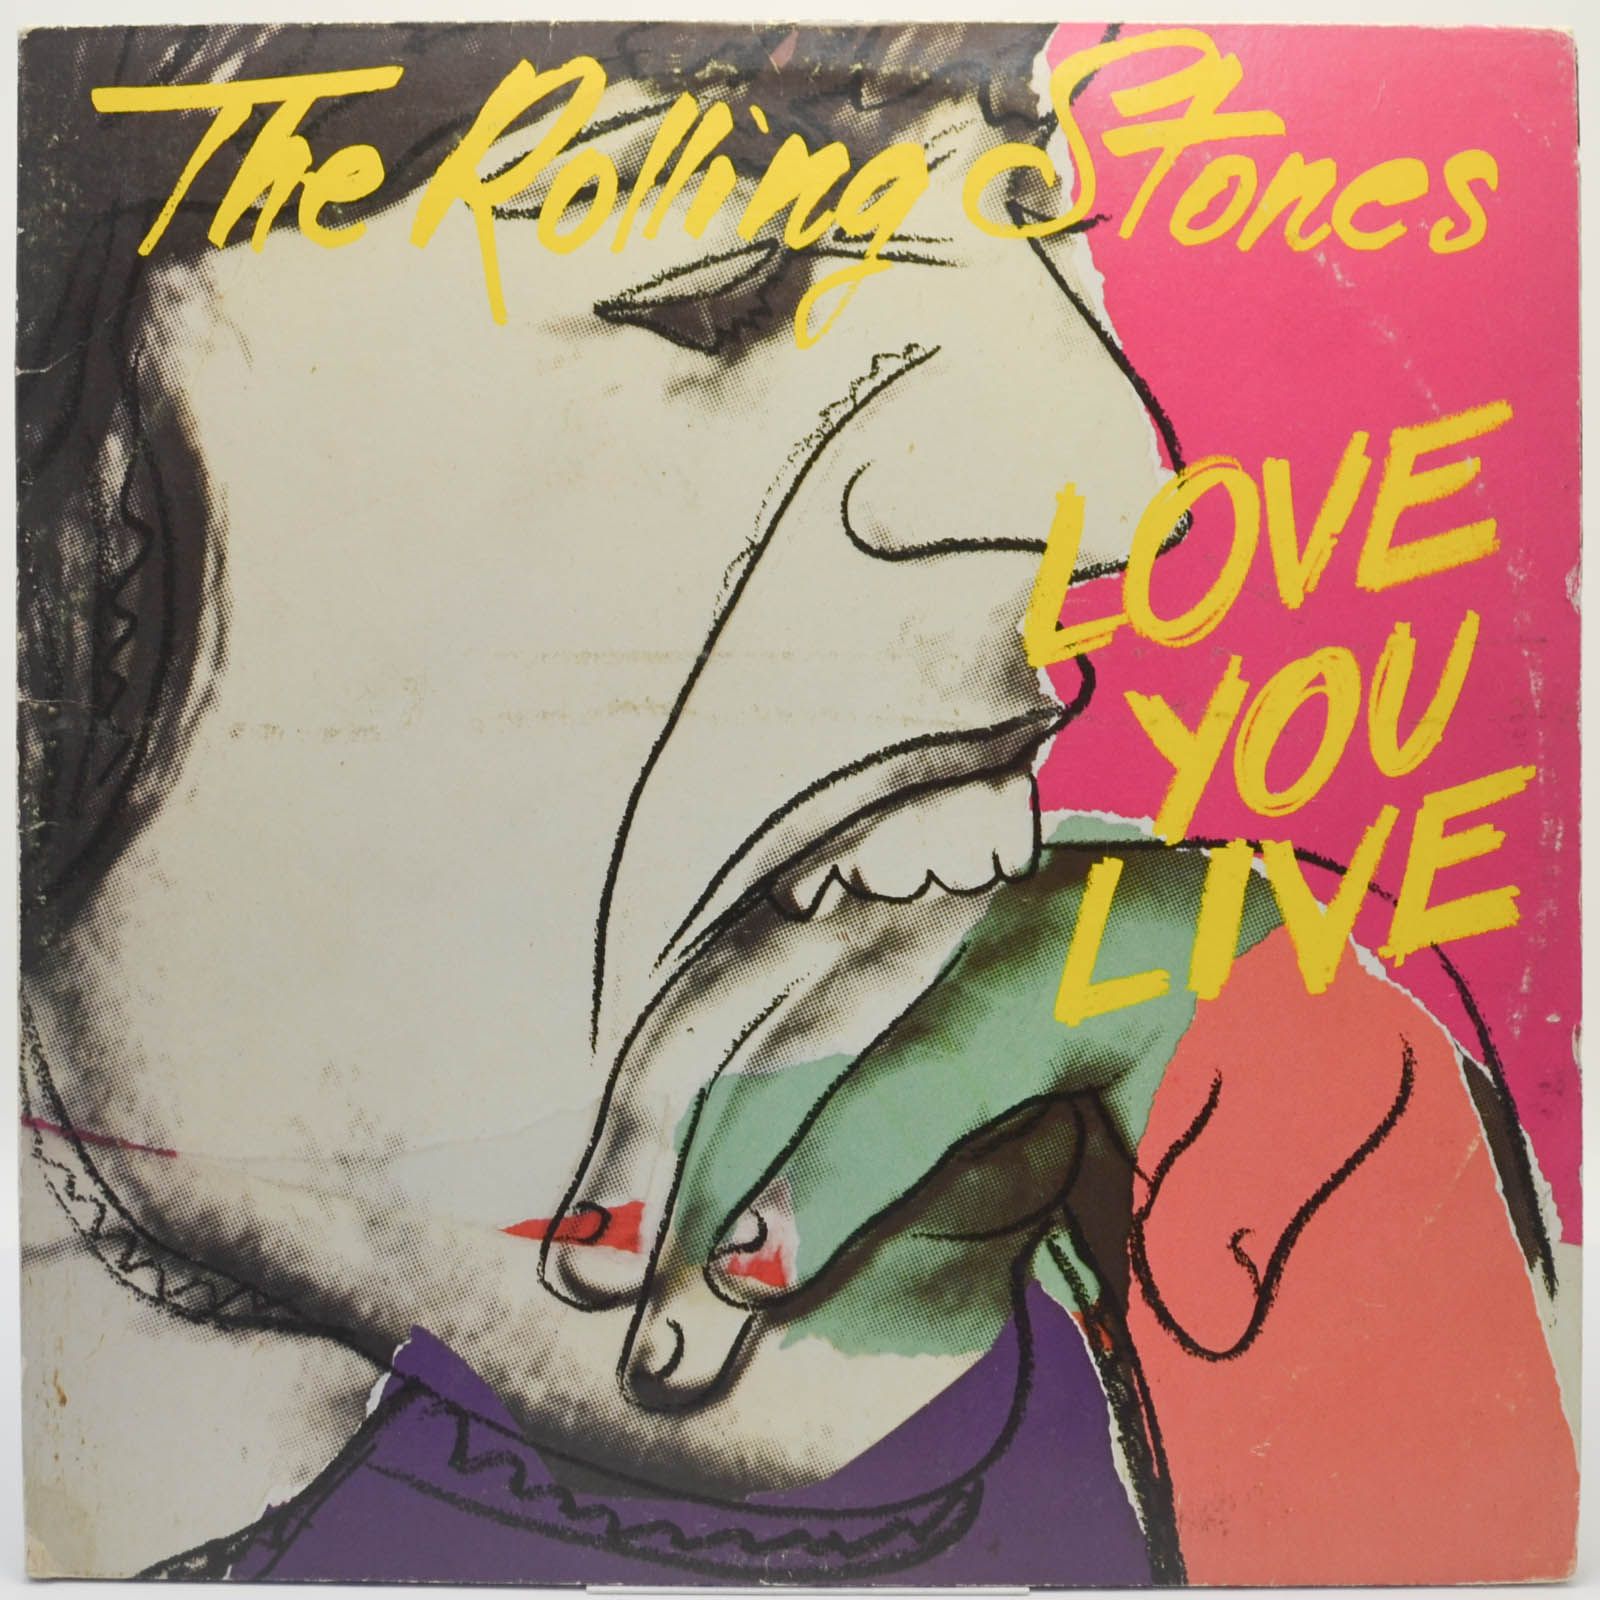 Rolling Stones — Love You Live (2LP, USA), 1977